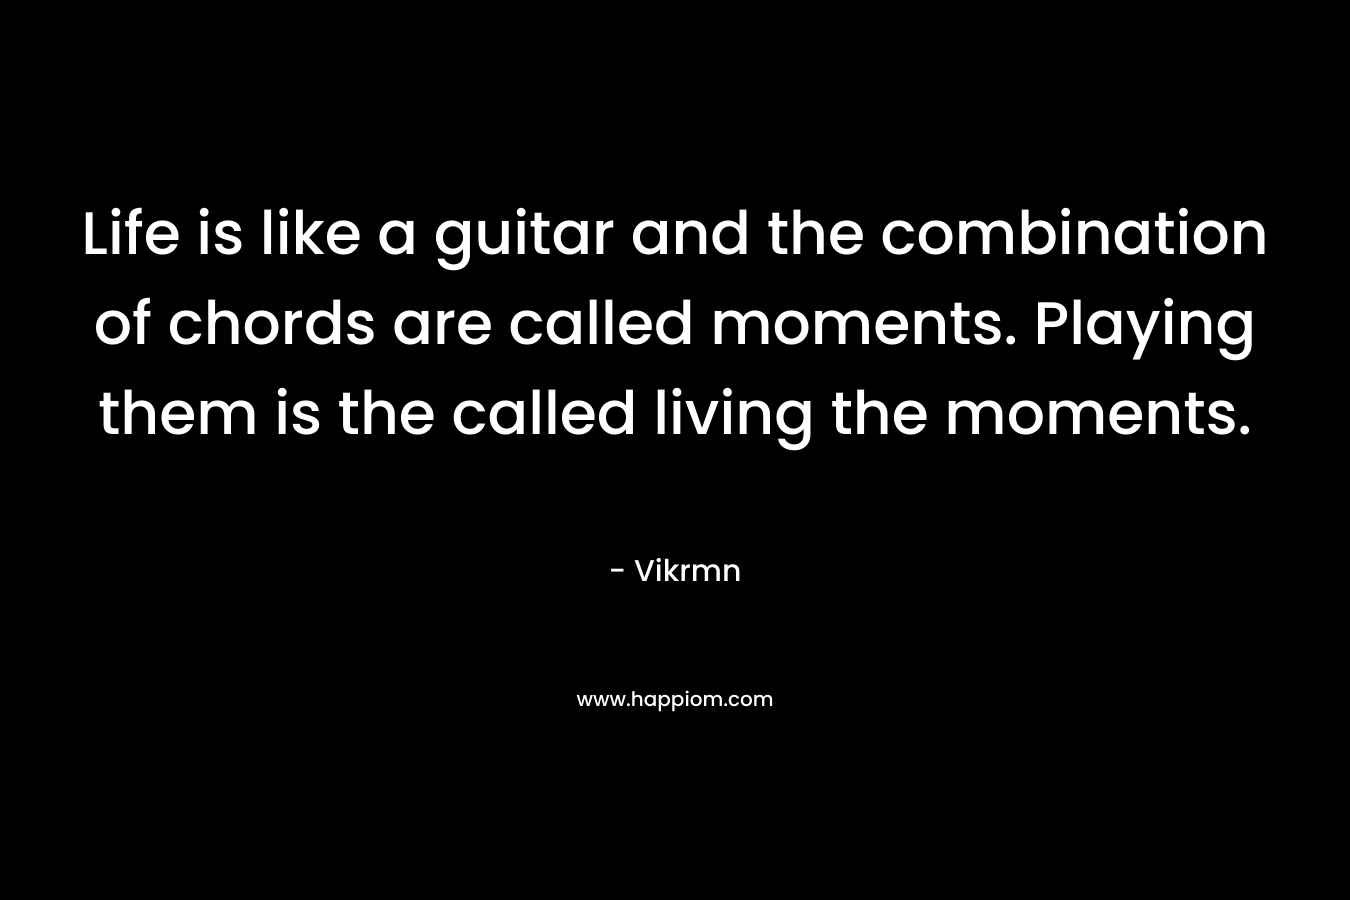 Life is like a guitar and the combination of chords are called moments. Playing them is the called living the moments.